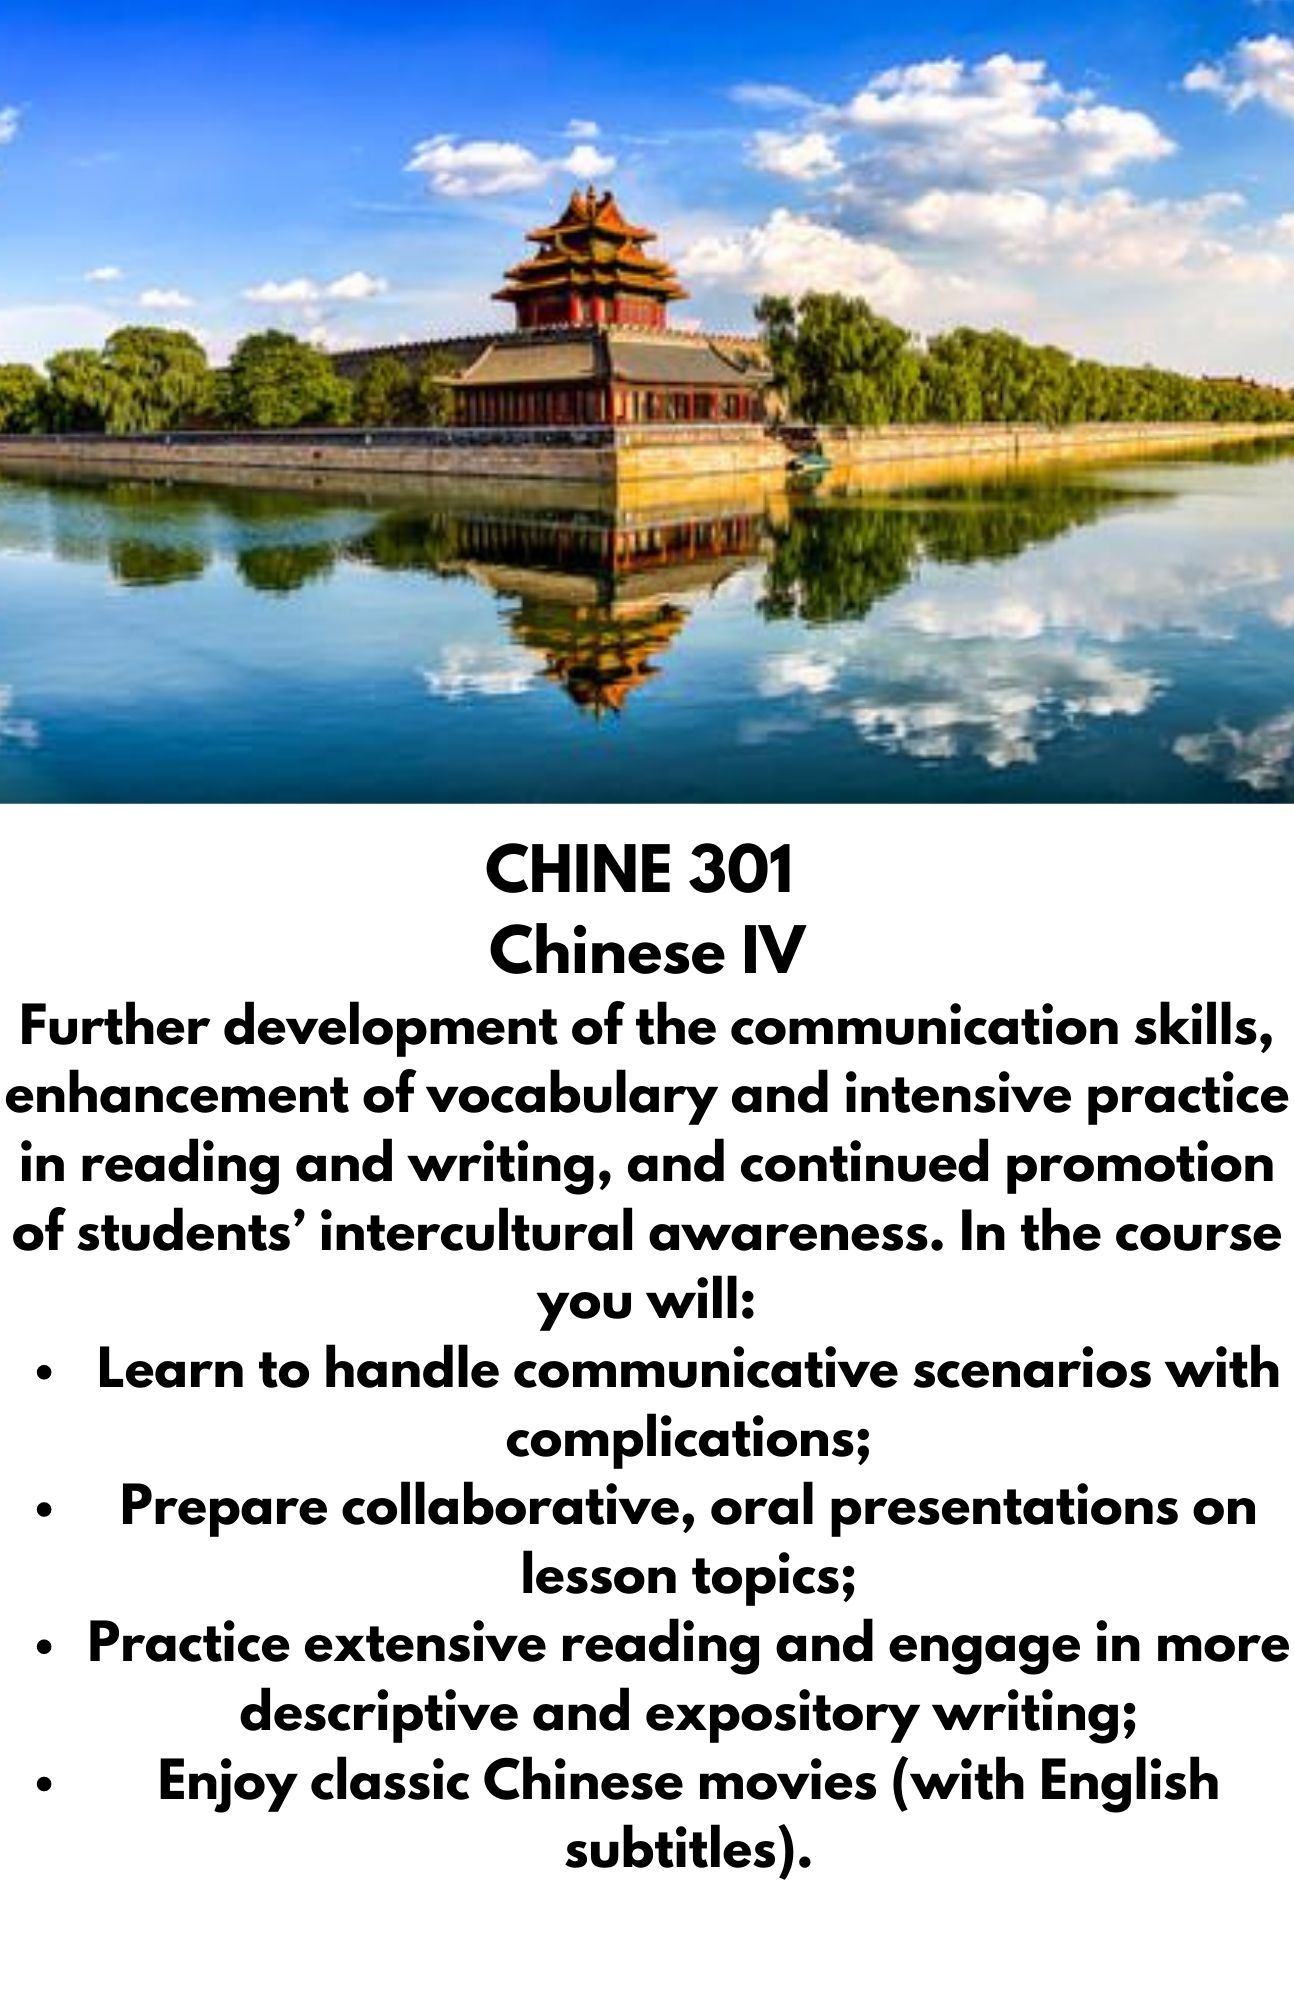 CHINE 301  Chinese IV Further development of the communication skills, enhancement of vocabulary and intensive practice in reading and writing, and continued promotion of students’ intercultural awareness. In the course you will: Learn to handle communicative scenarios with complications; Prepare collaborative, oral presentations on lesson topics; Practice extensive reading and engage in more descriptive and expository writing; Enjoy classic Chinese movies (with English subtitles).